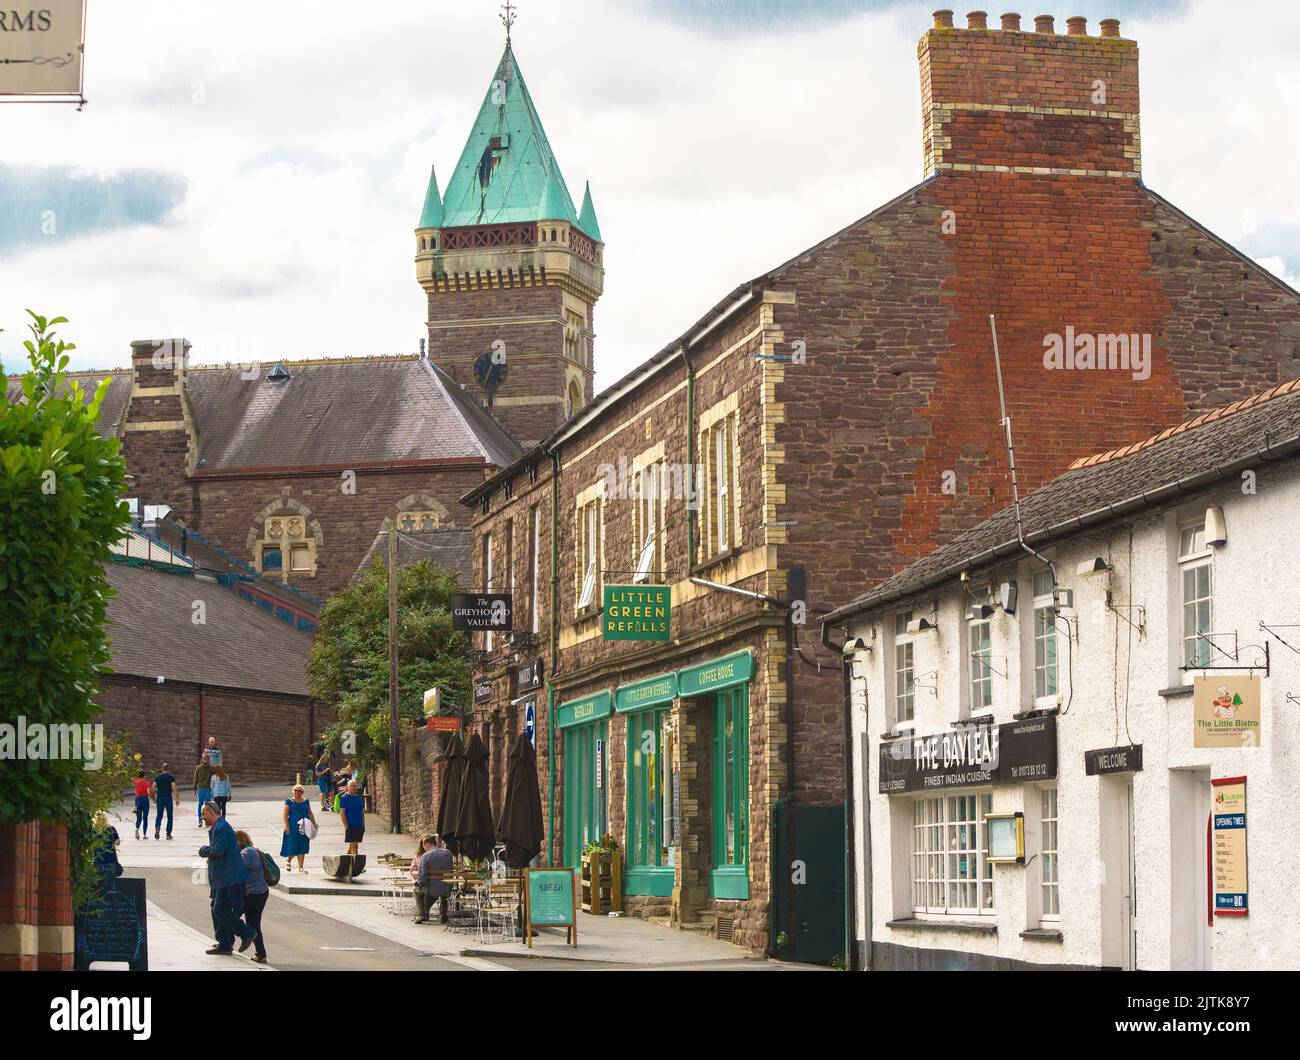 A view of Market St, Abergavenny, Monmouthshire, showing the Town Hall in the background. Stock Photo